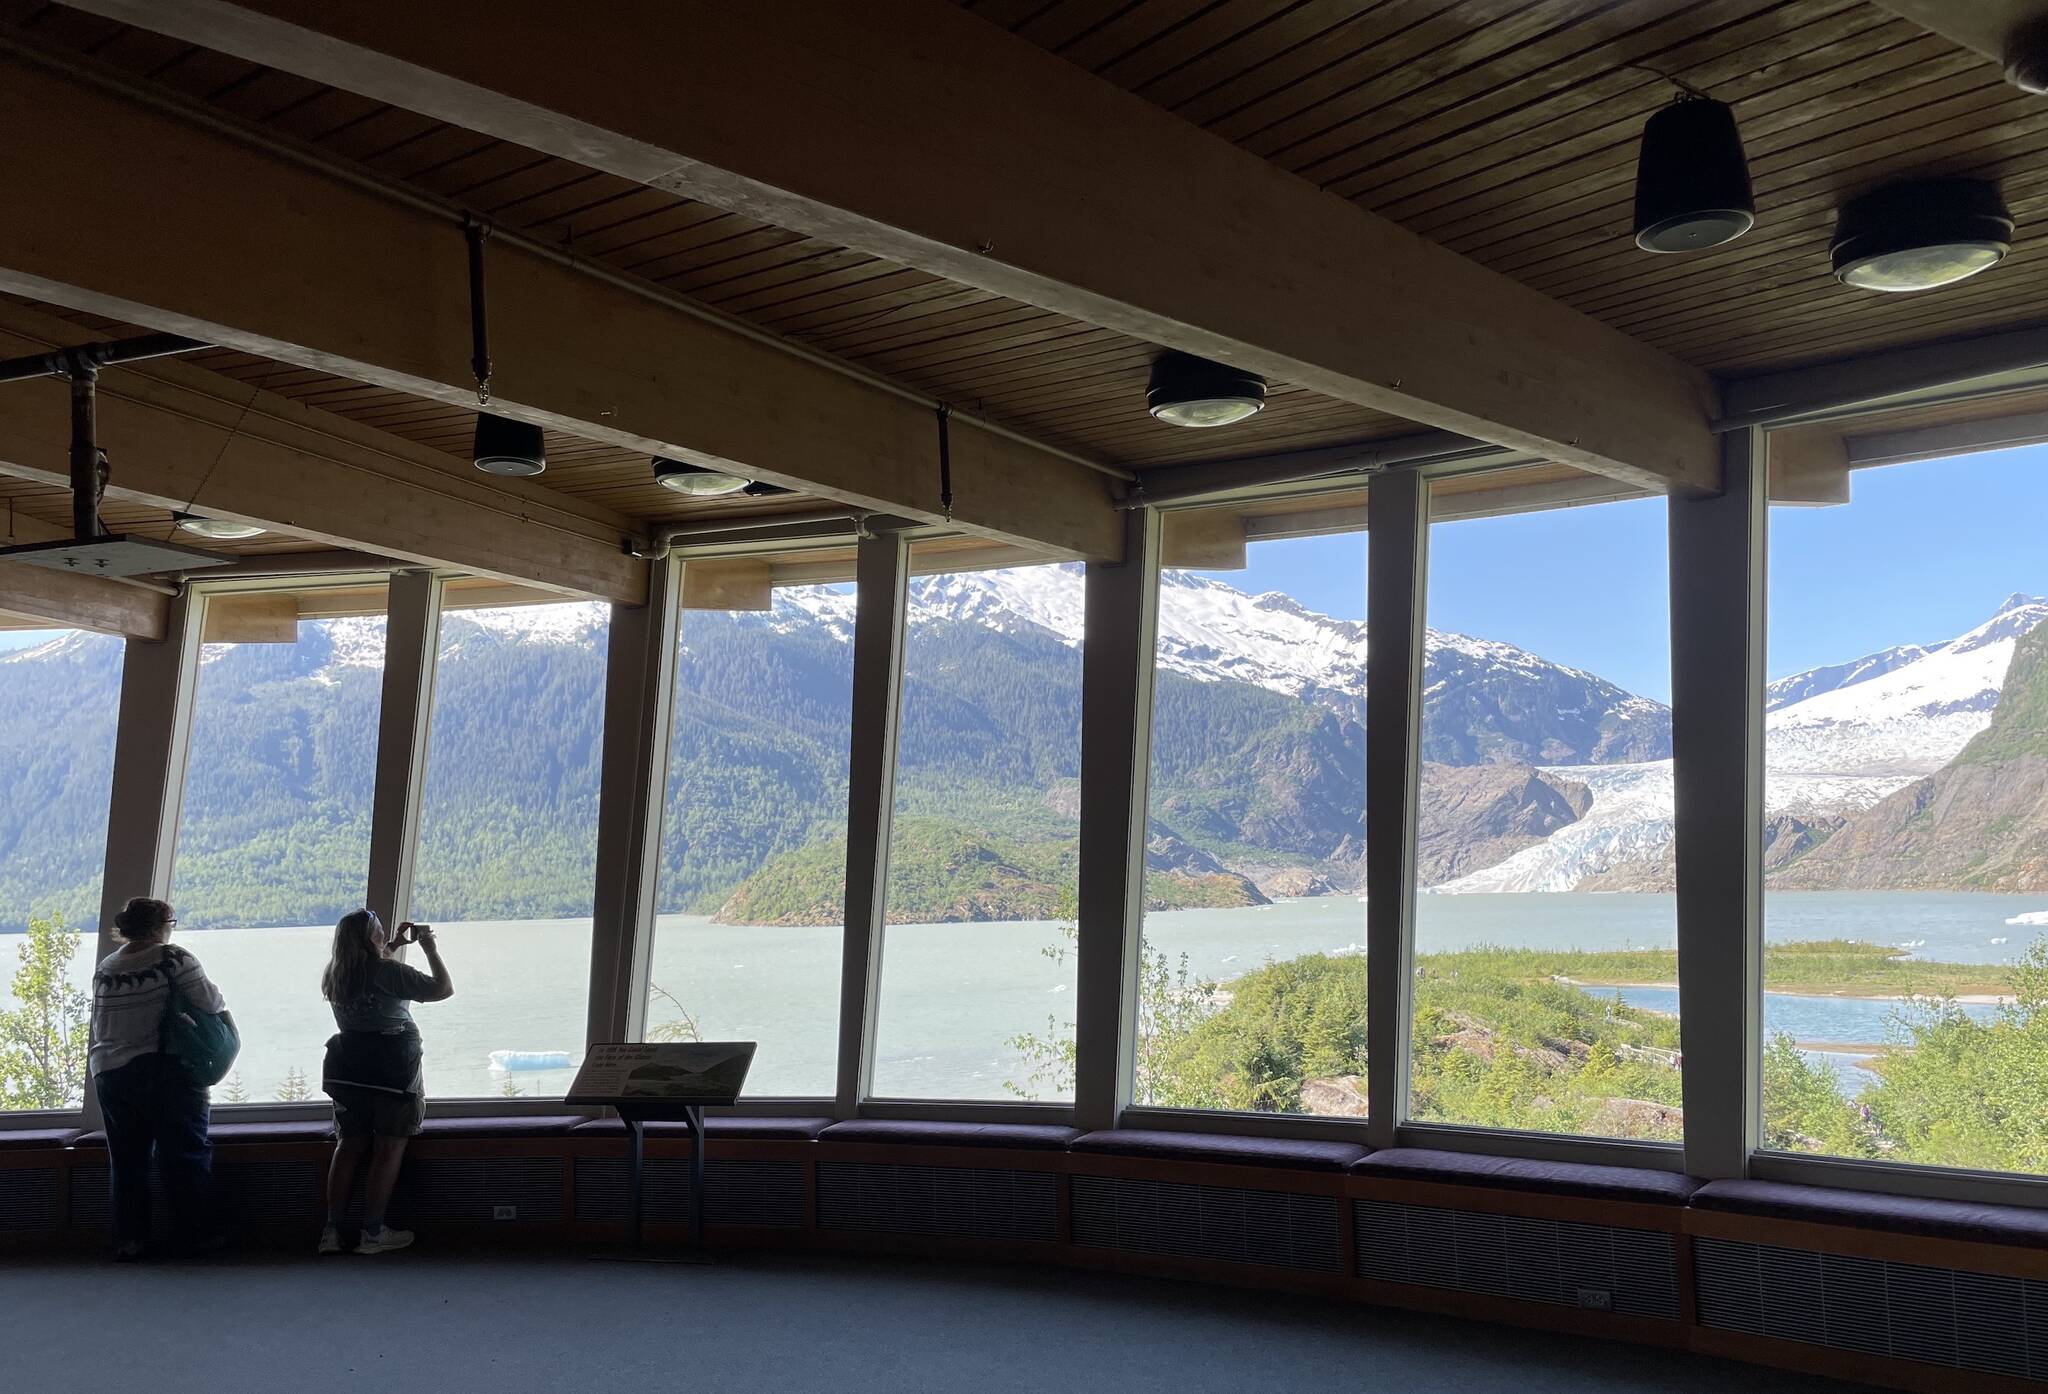 Visitors take images of Mendenhall Glacier near Juneau in summer 2022 from inside the Mendenhall Glacier Visitor Center. (Courtesy Photo / Ned Rozell)